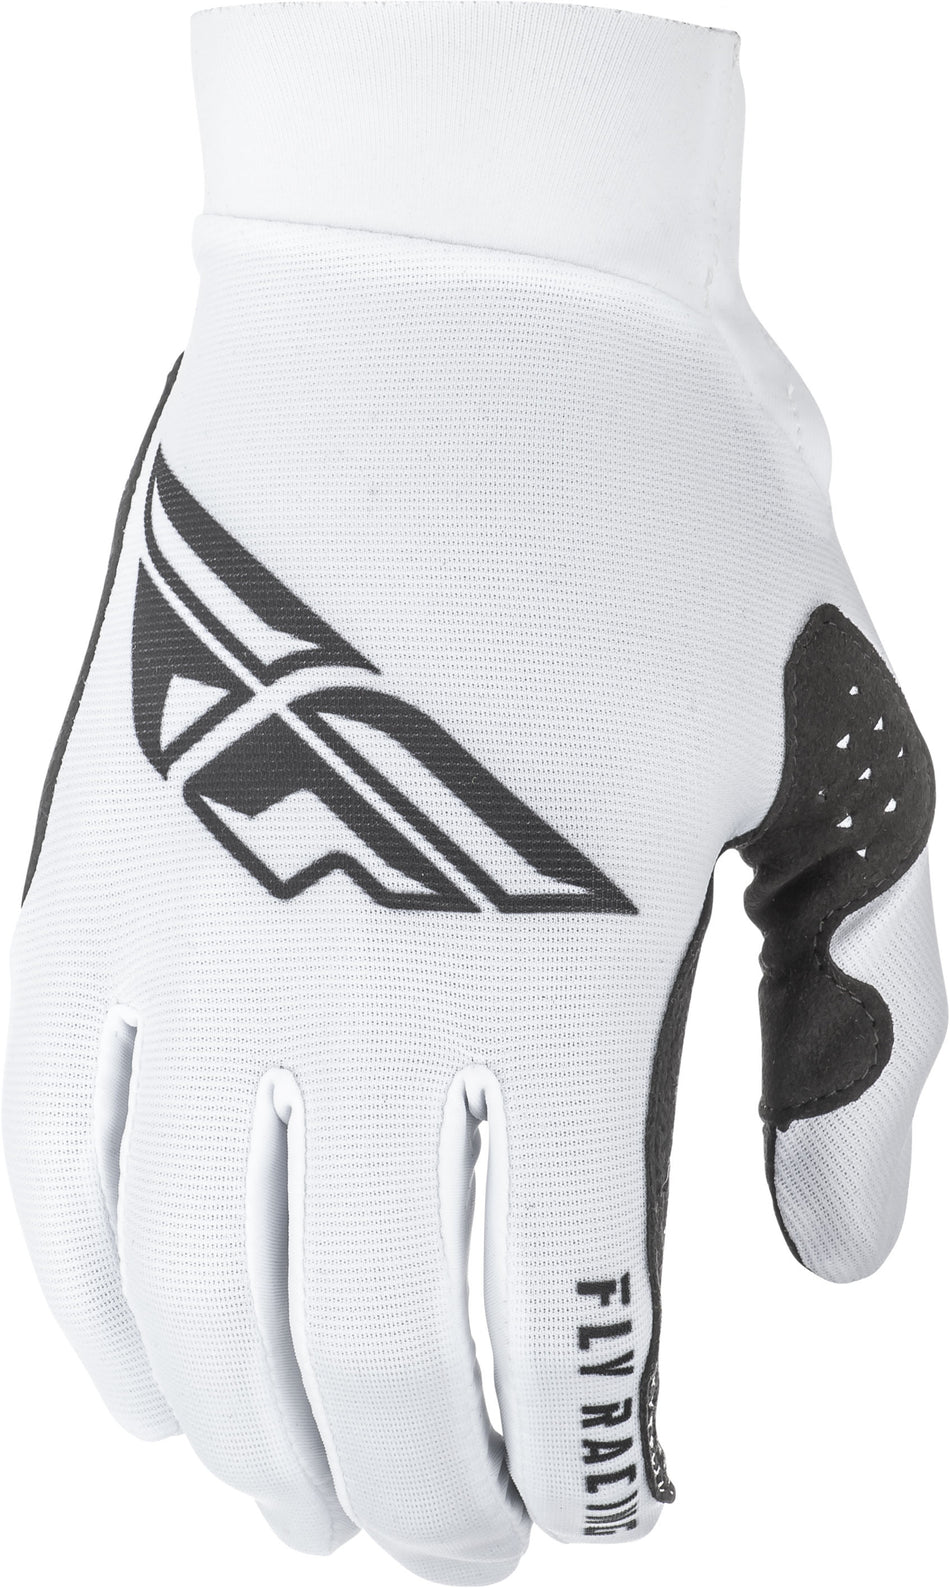 FLY RACING Pro Lite Gloves White Sz 06 372-81406